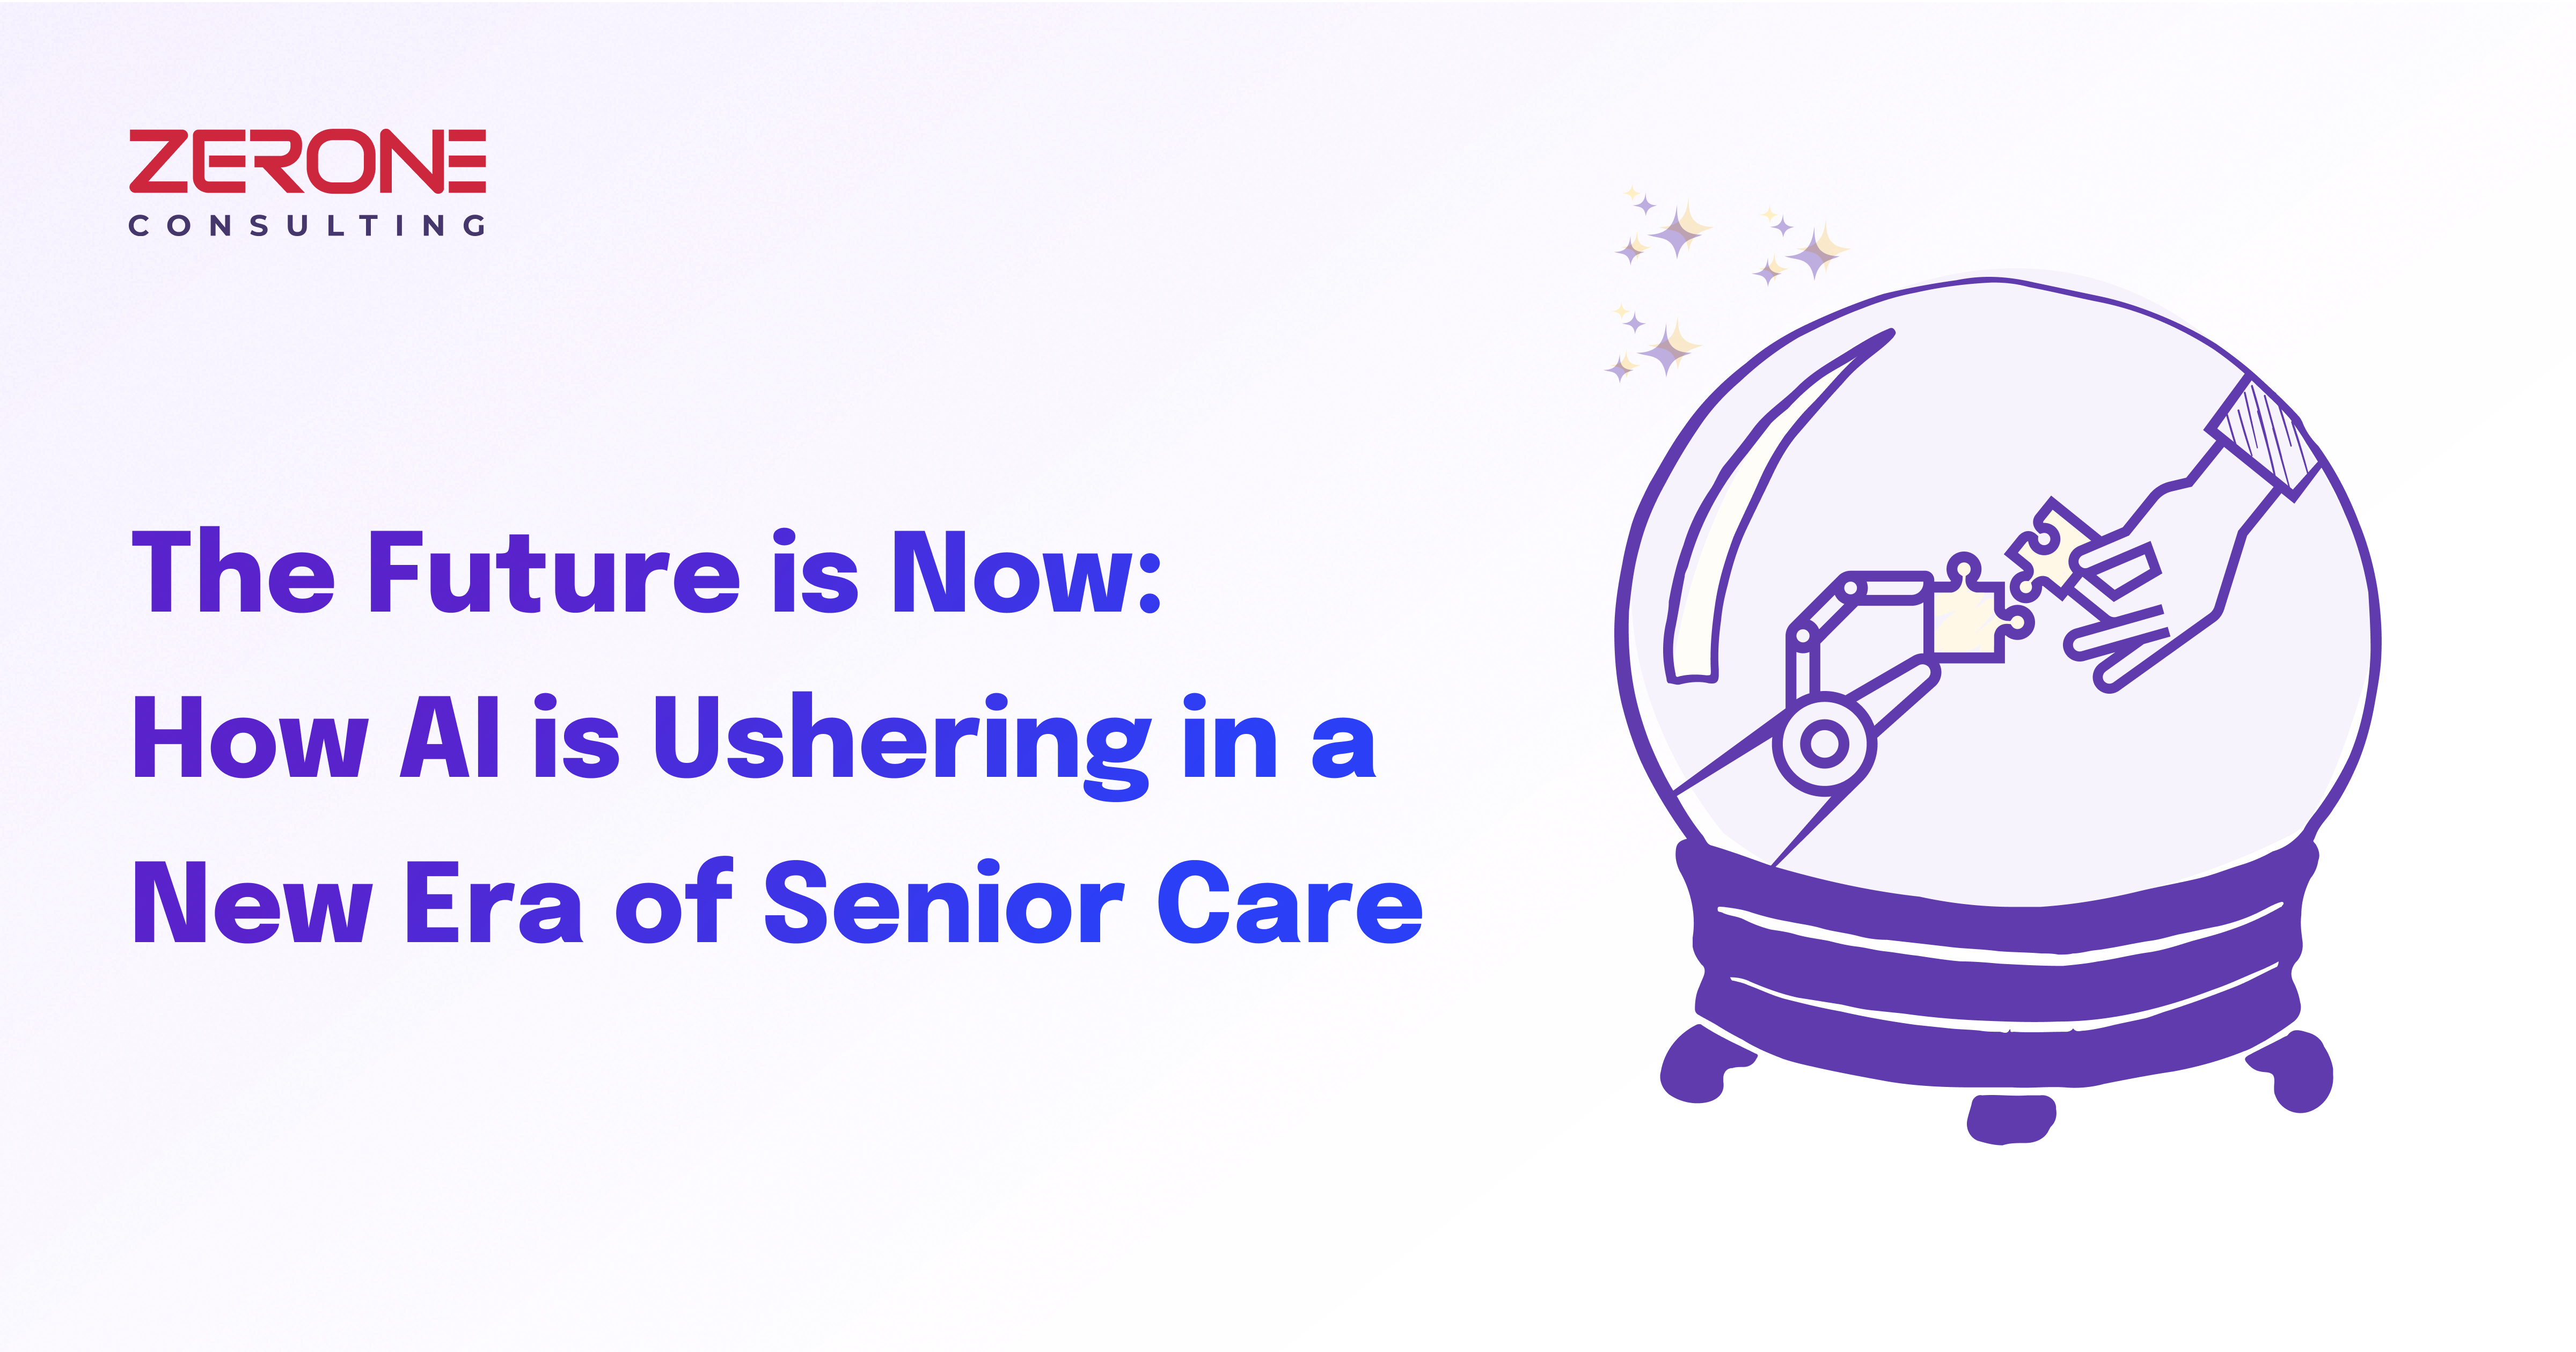 The Future is Now: How AI is Ushering in a New Era of Senior Care